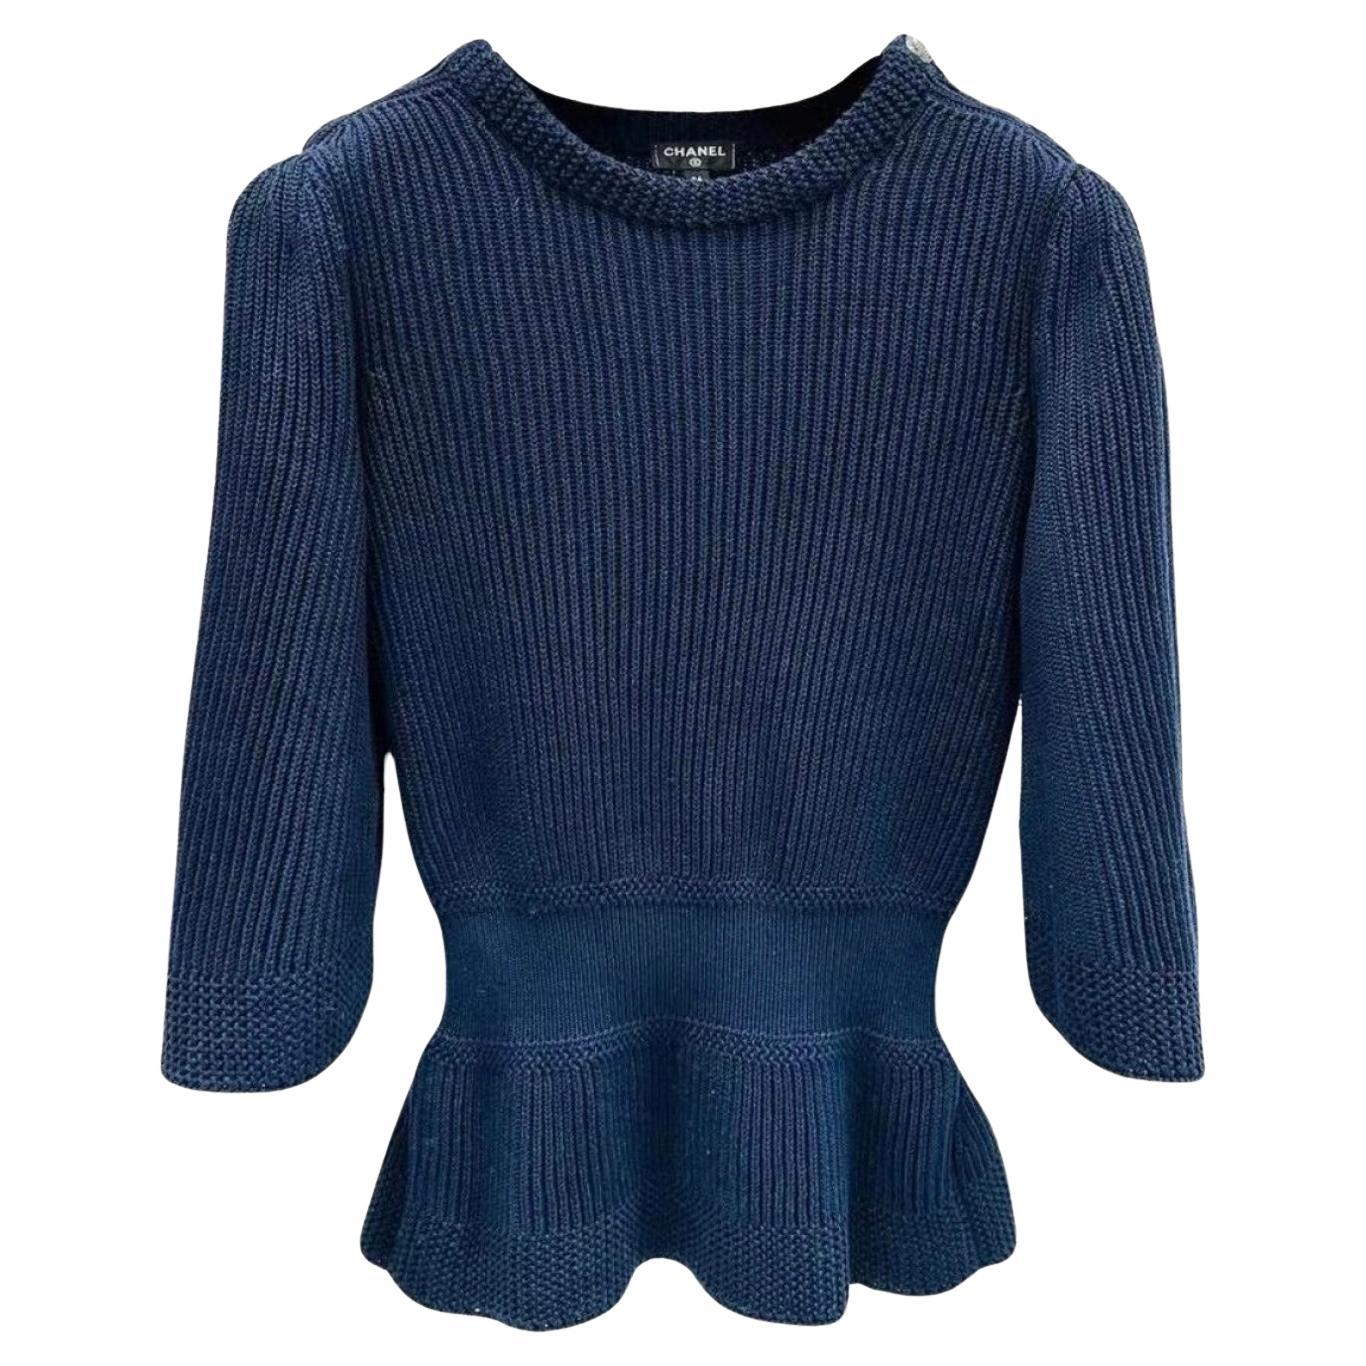 Chanel Runway Jumper From AIRPORT Collection For Sale